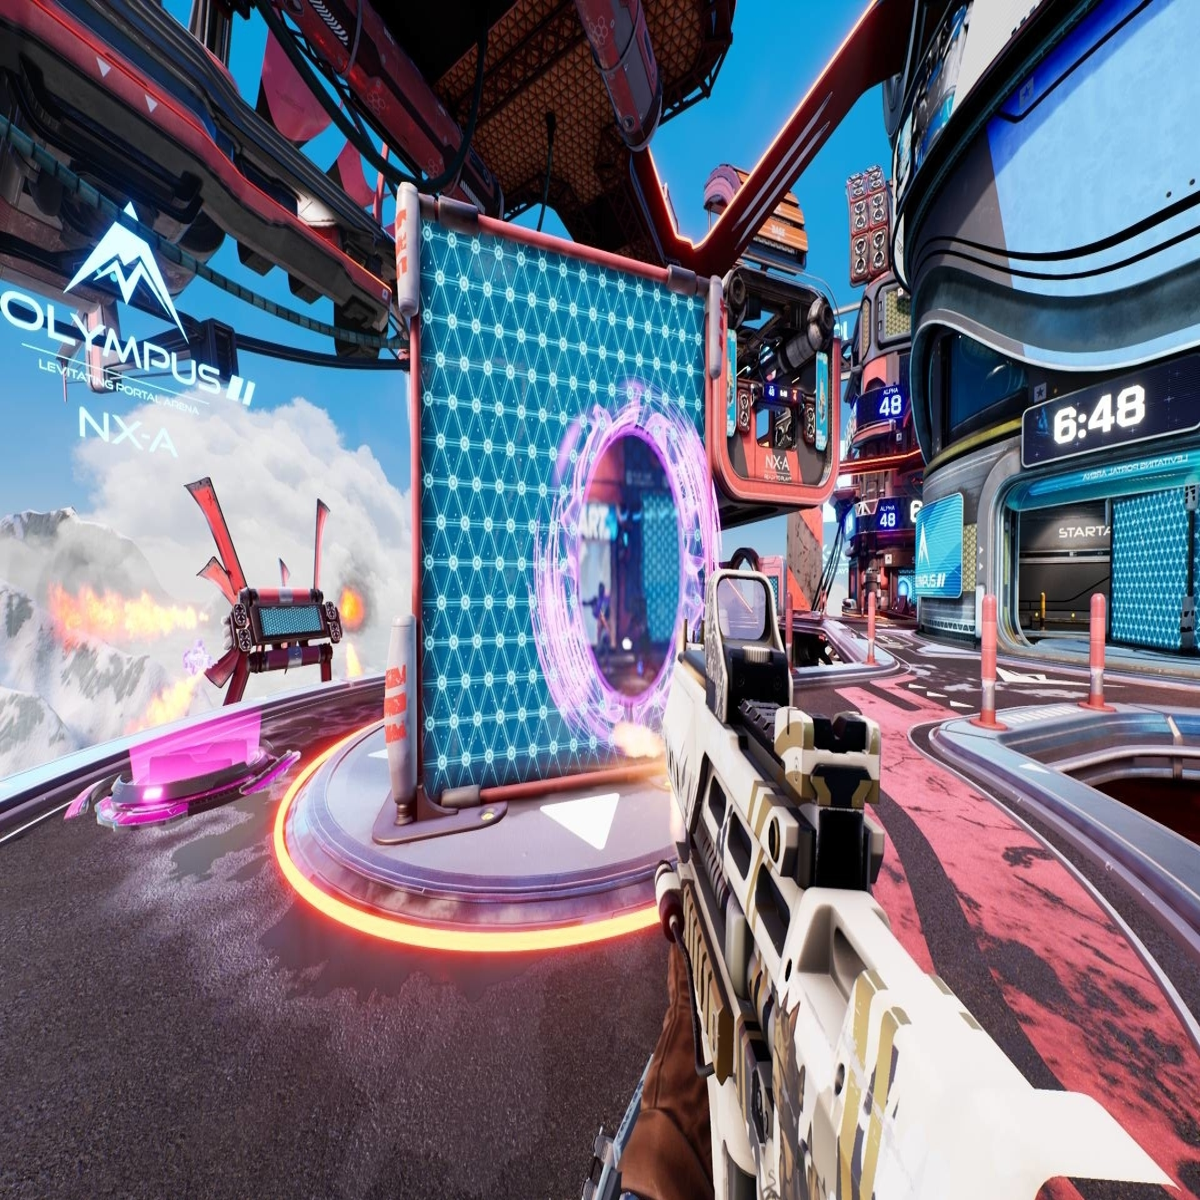 Splitgate Developer Secures $100 Million Funding to Stay Independent